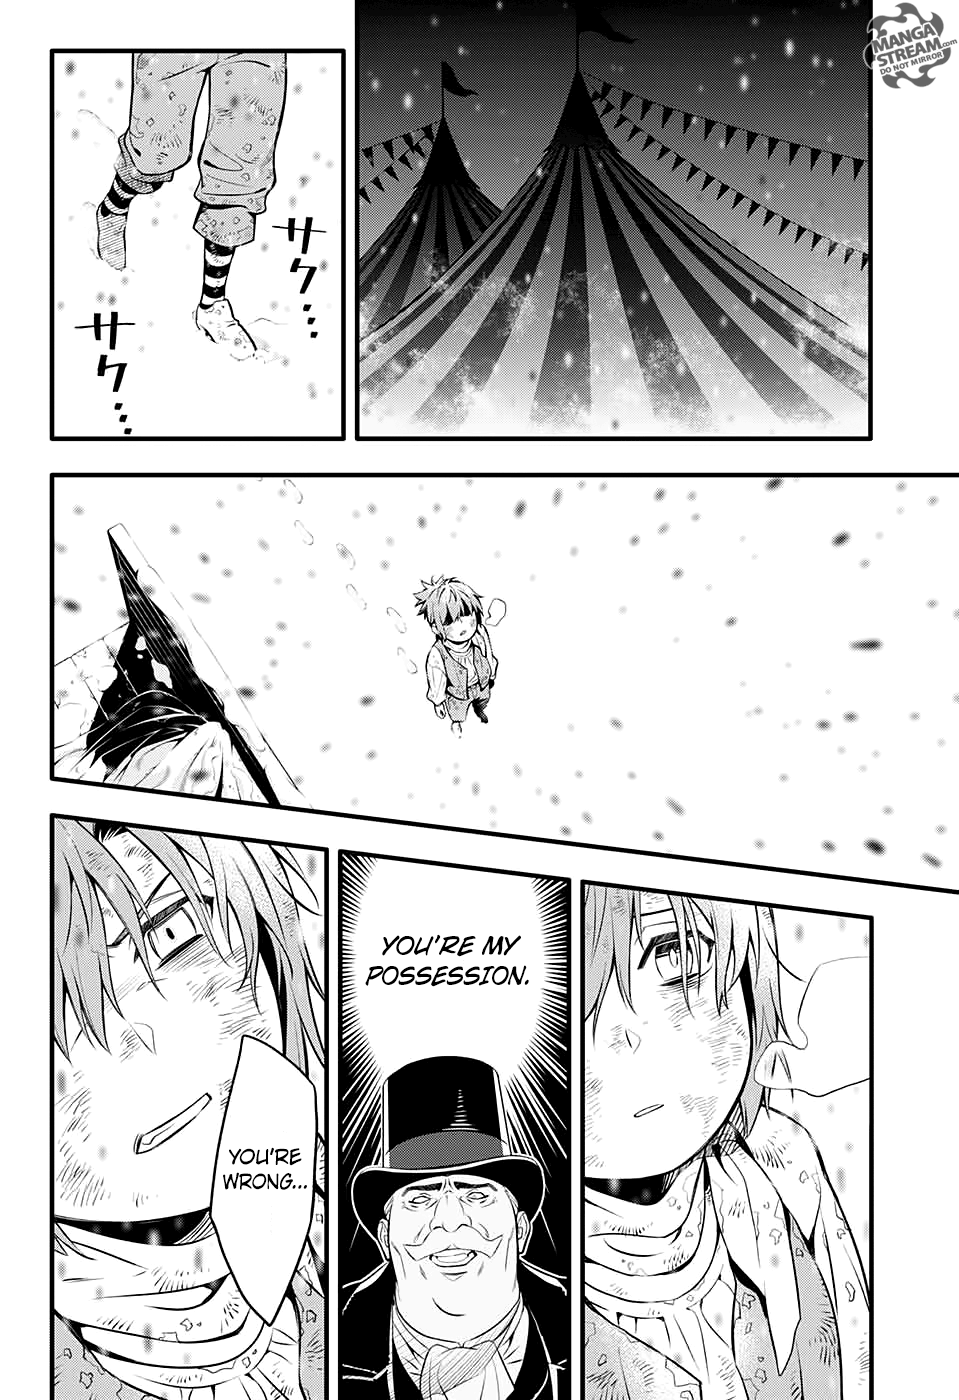 D.Gray-man chapter 232 page 26